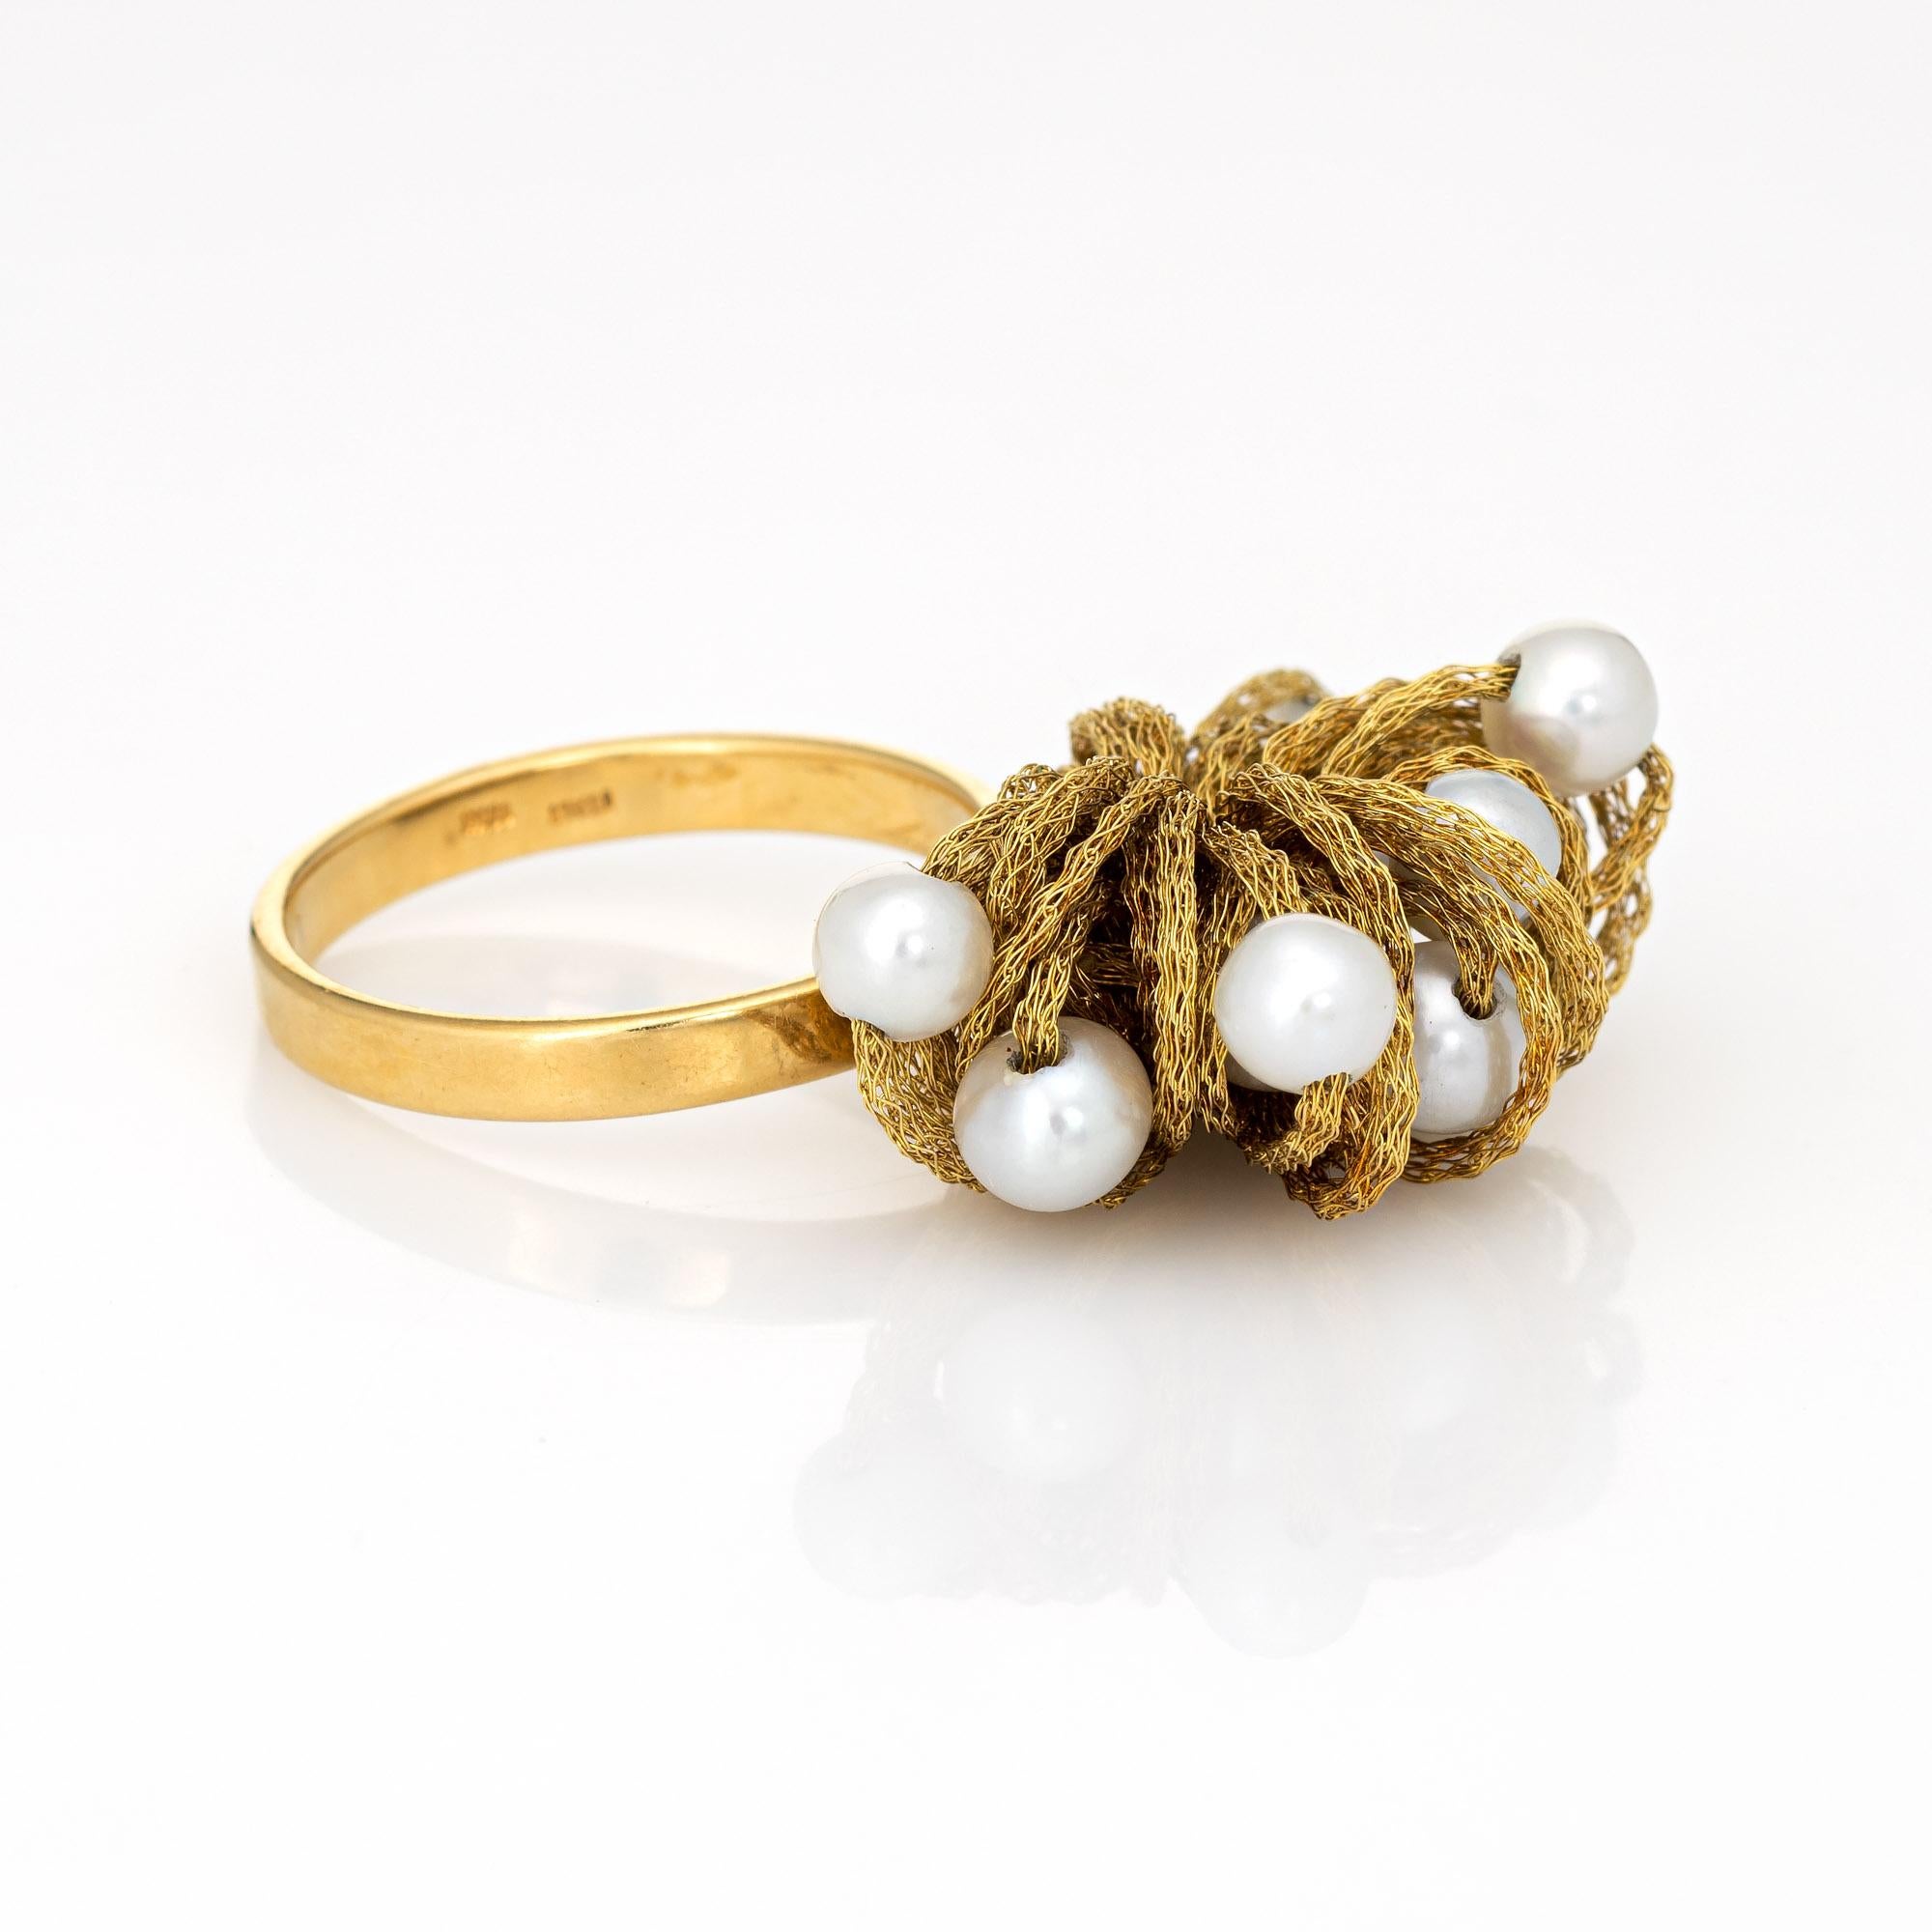 Stylish vintage cultured pearl woven fabric ring (circa 1980s to 1990s) crafted in 18 karat yellow gold. 

Cultured pearls measures (average) 4.3mm. The pearls are well matching and show rose overtones.  

The stylish and unique ring features